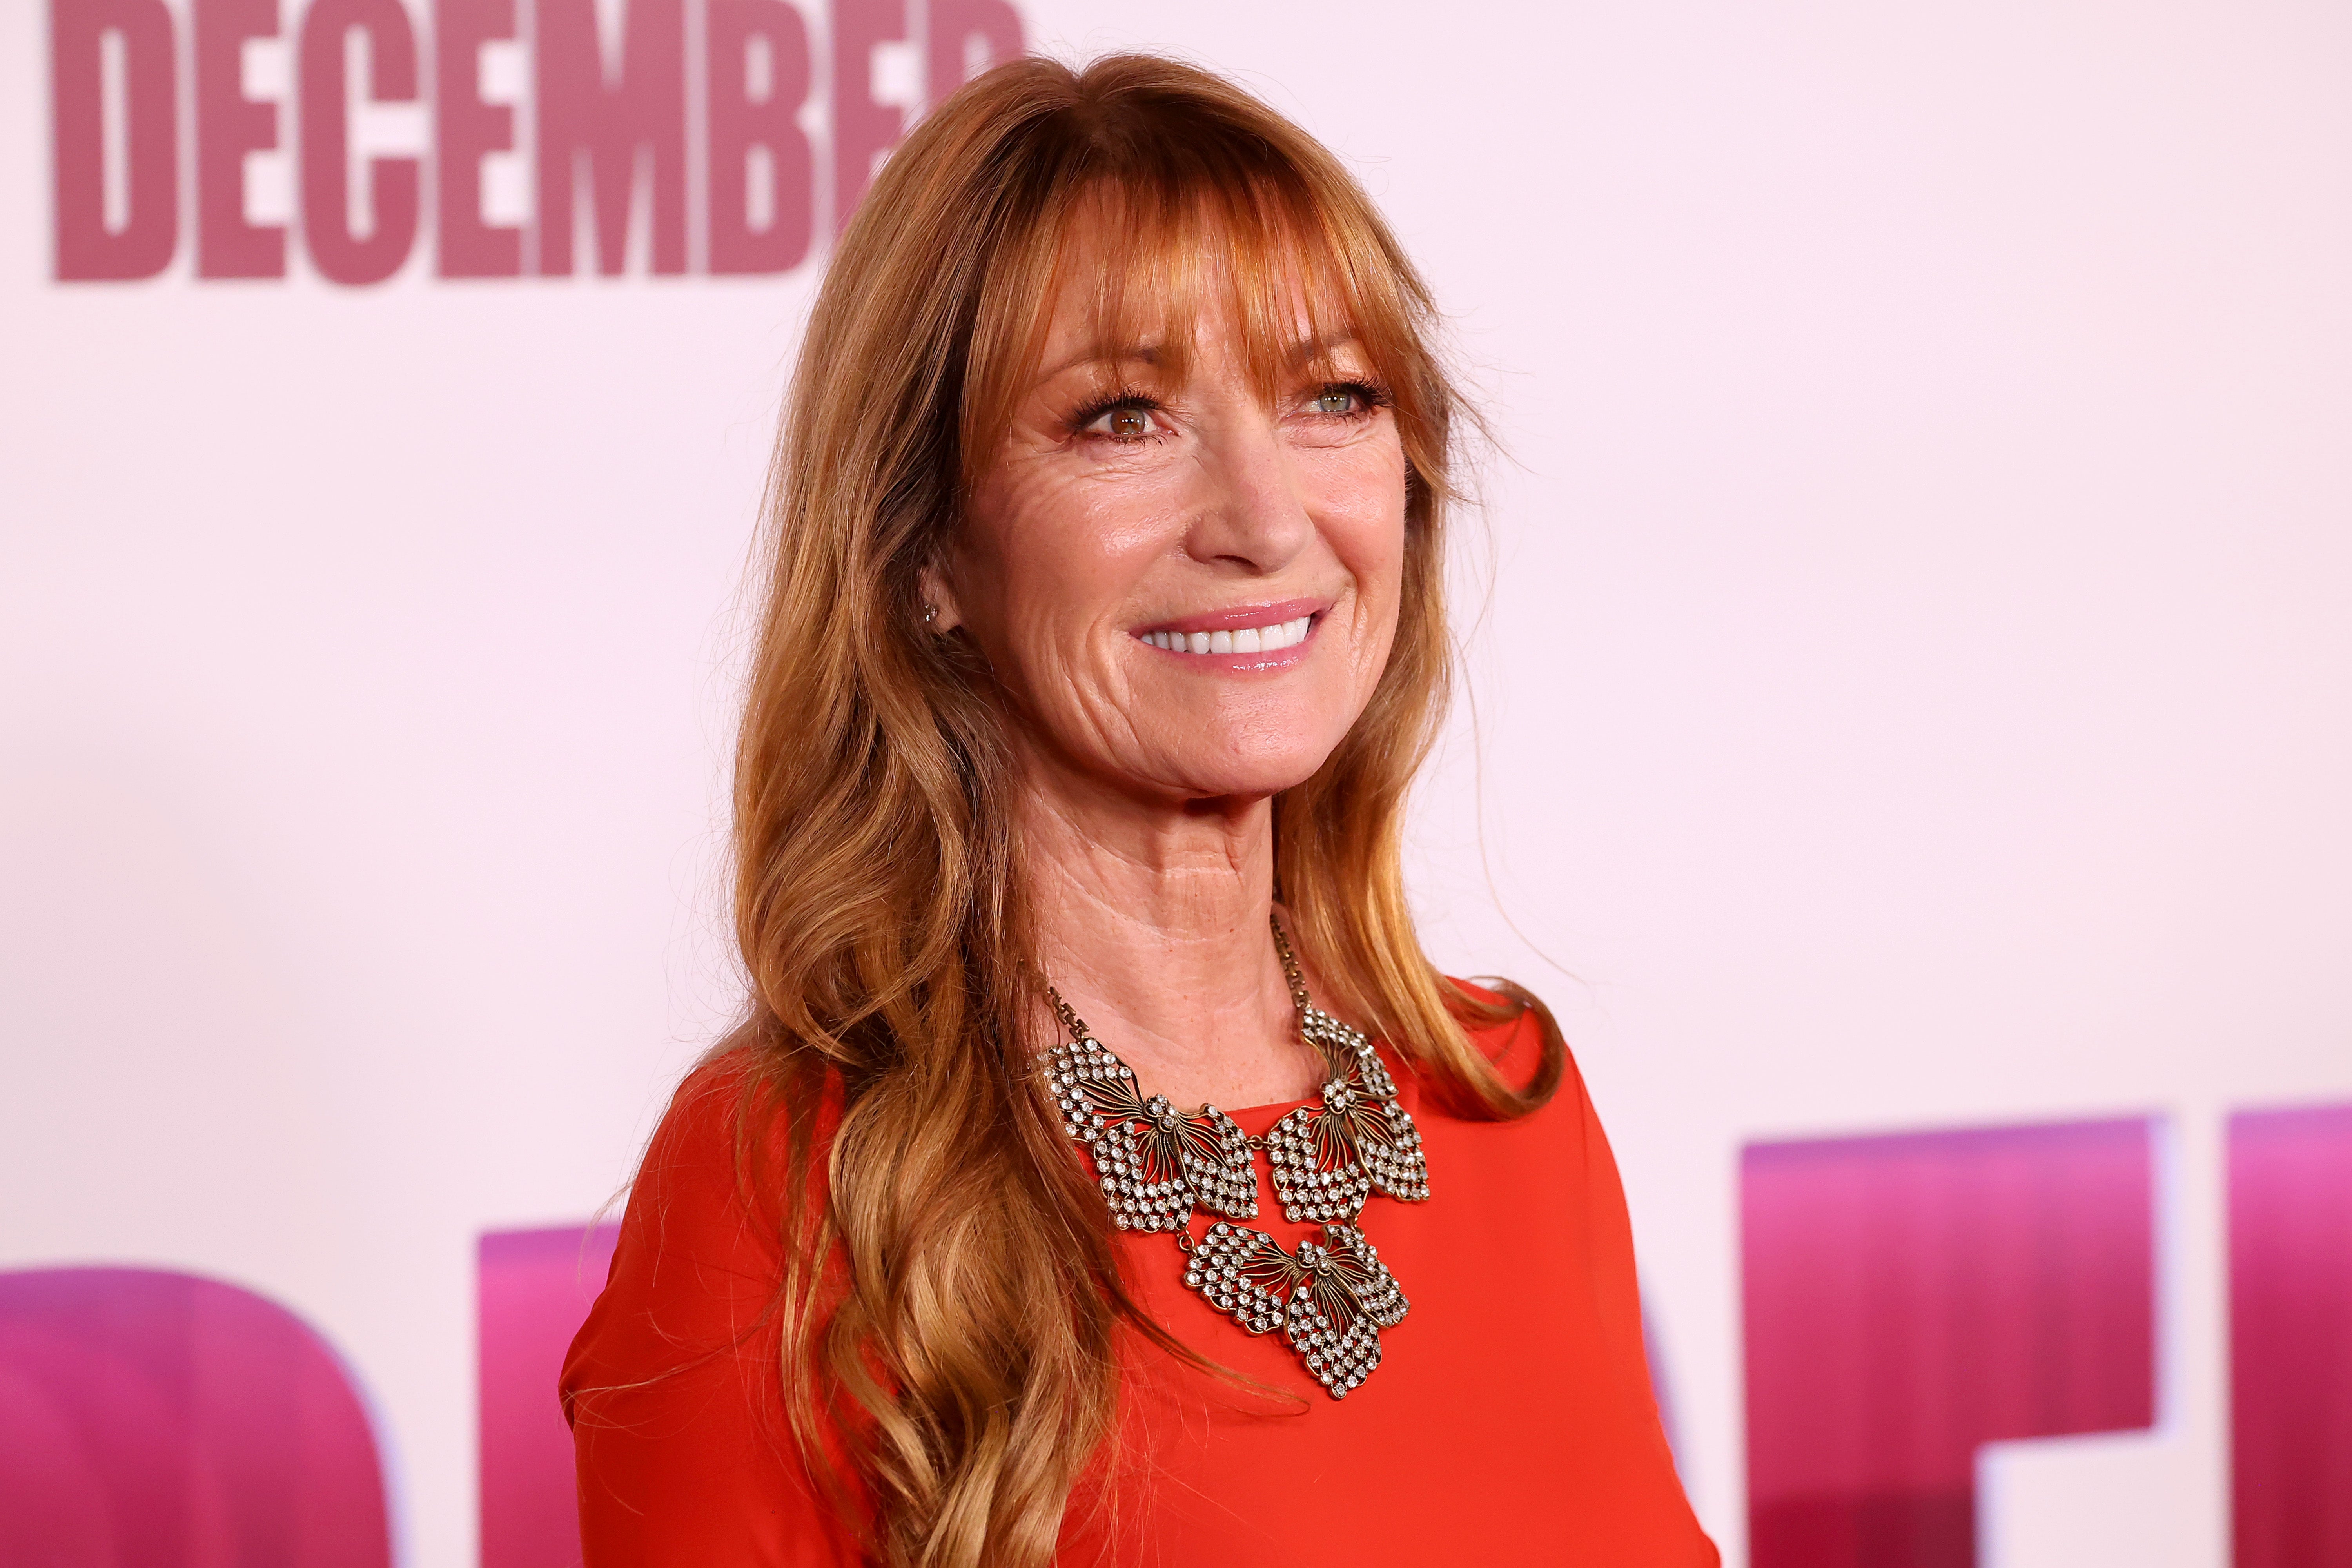 Is your sex life as good as Jane Seymour’s? Unlikely